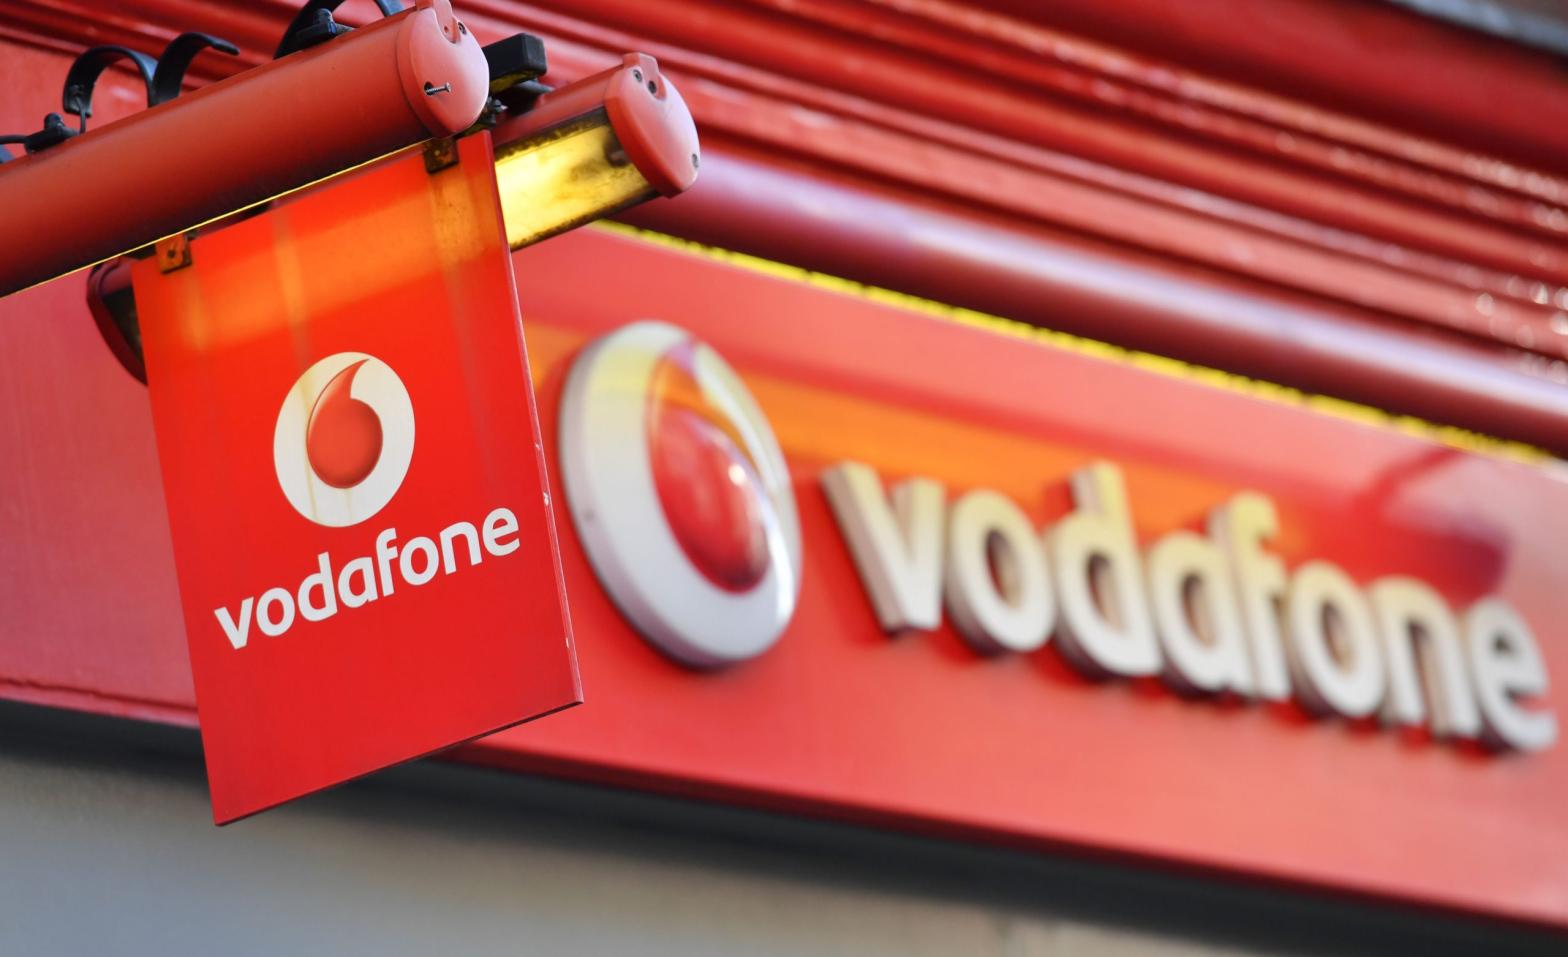 The Vodafone logo on display outside a retail shop in London in January 2018. (Photo: Ben Stansall, Getty Images)